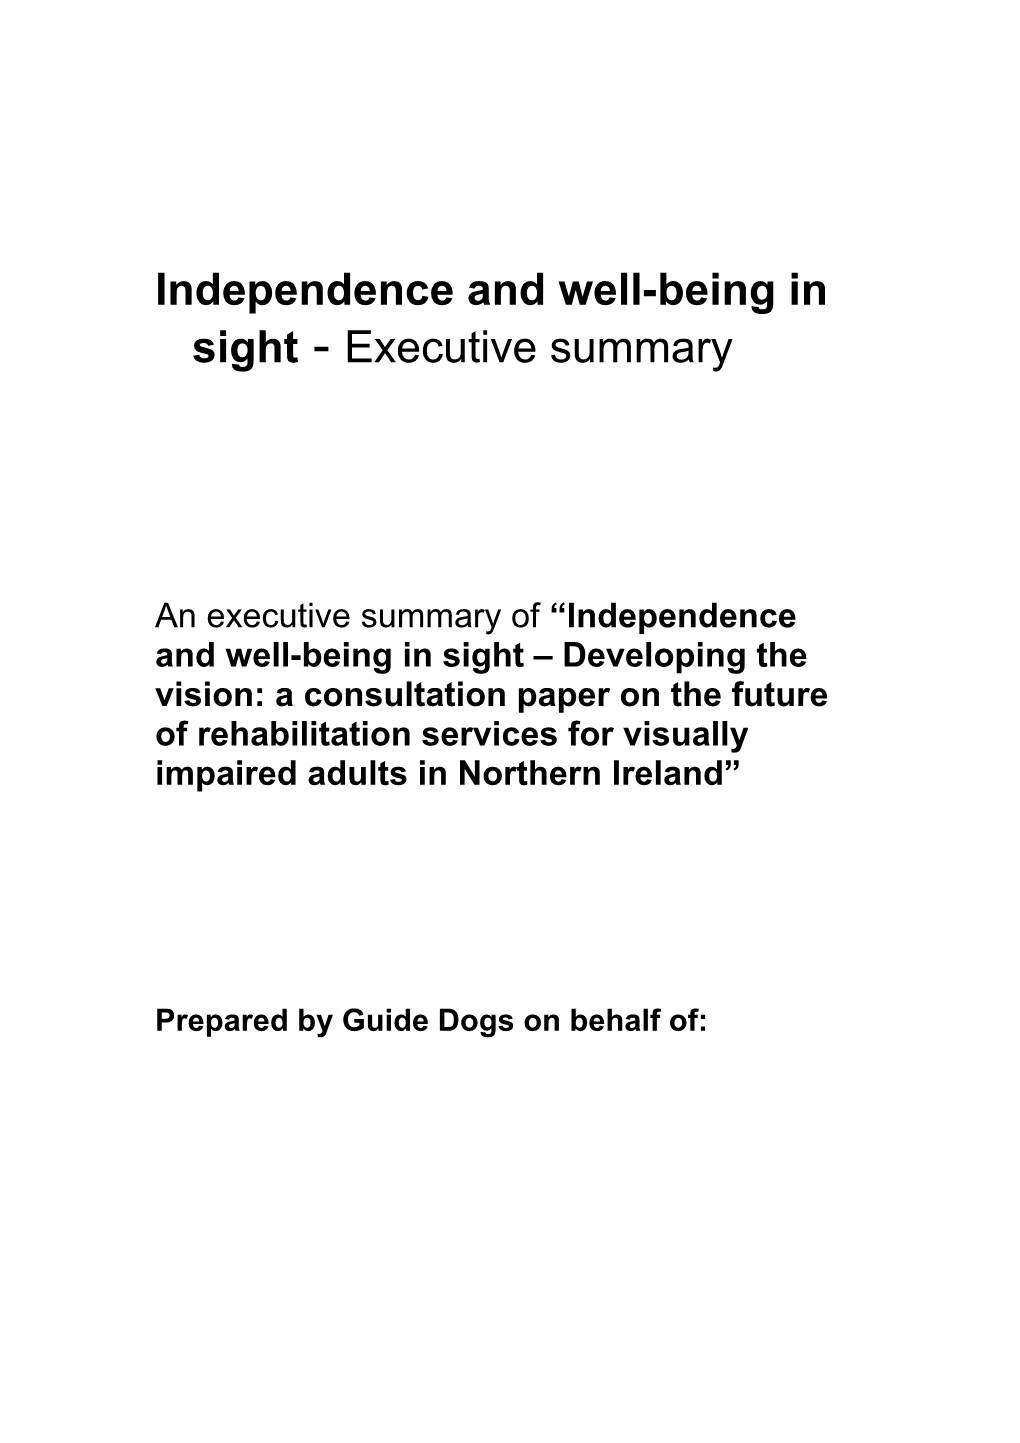 Independence, Choice and Wellbeing in Sight Developing the Vision